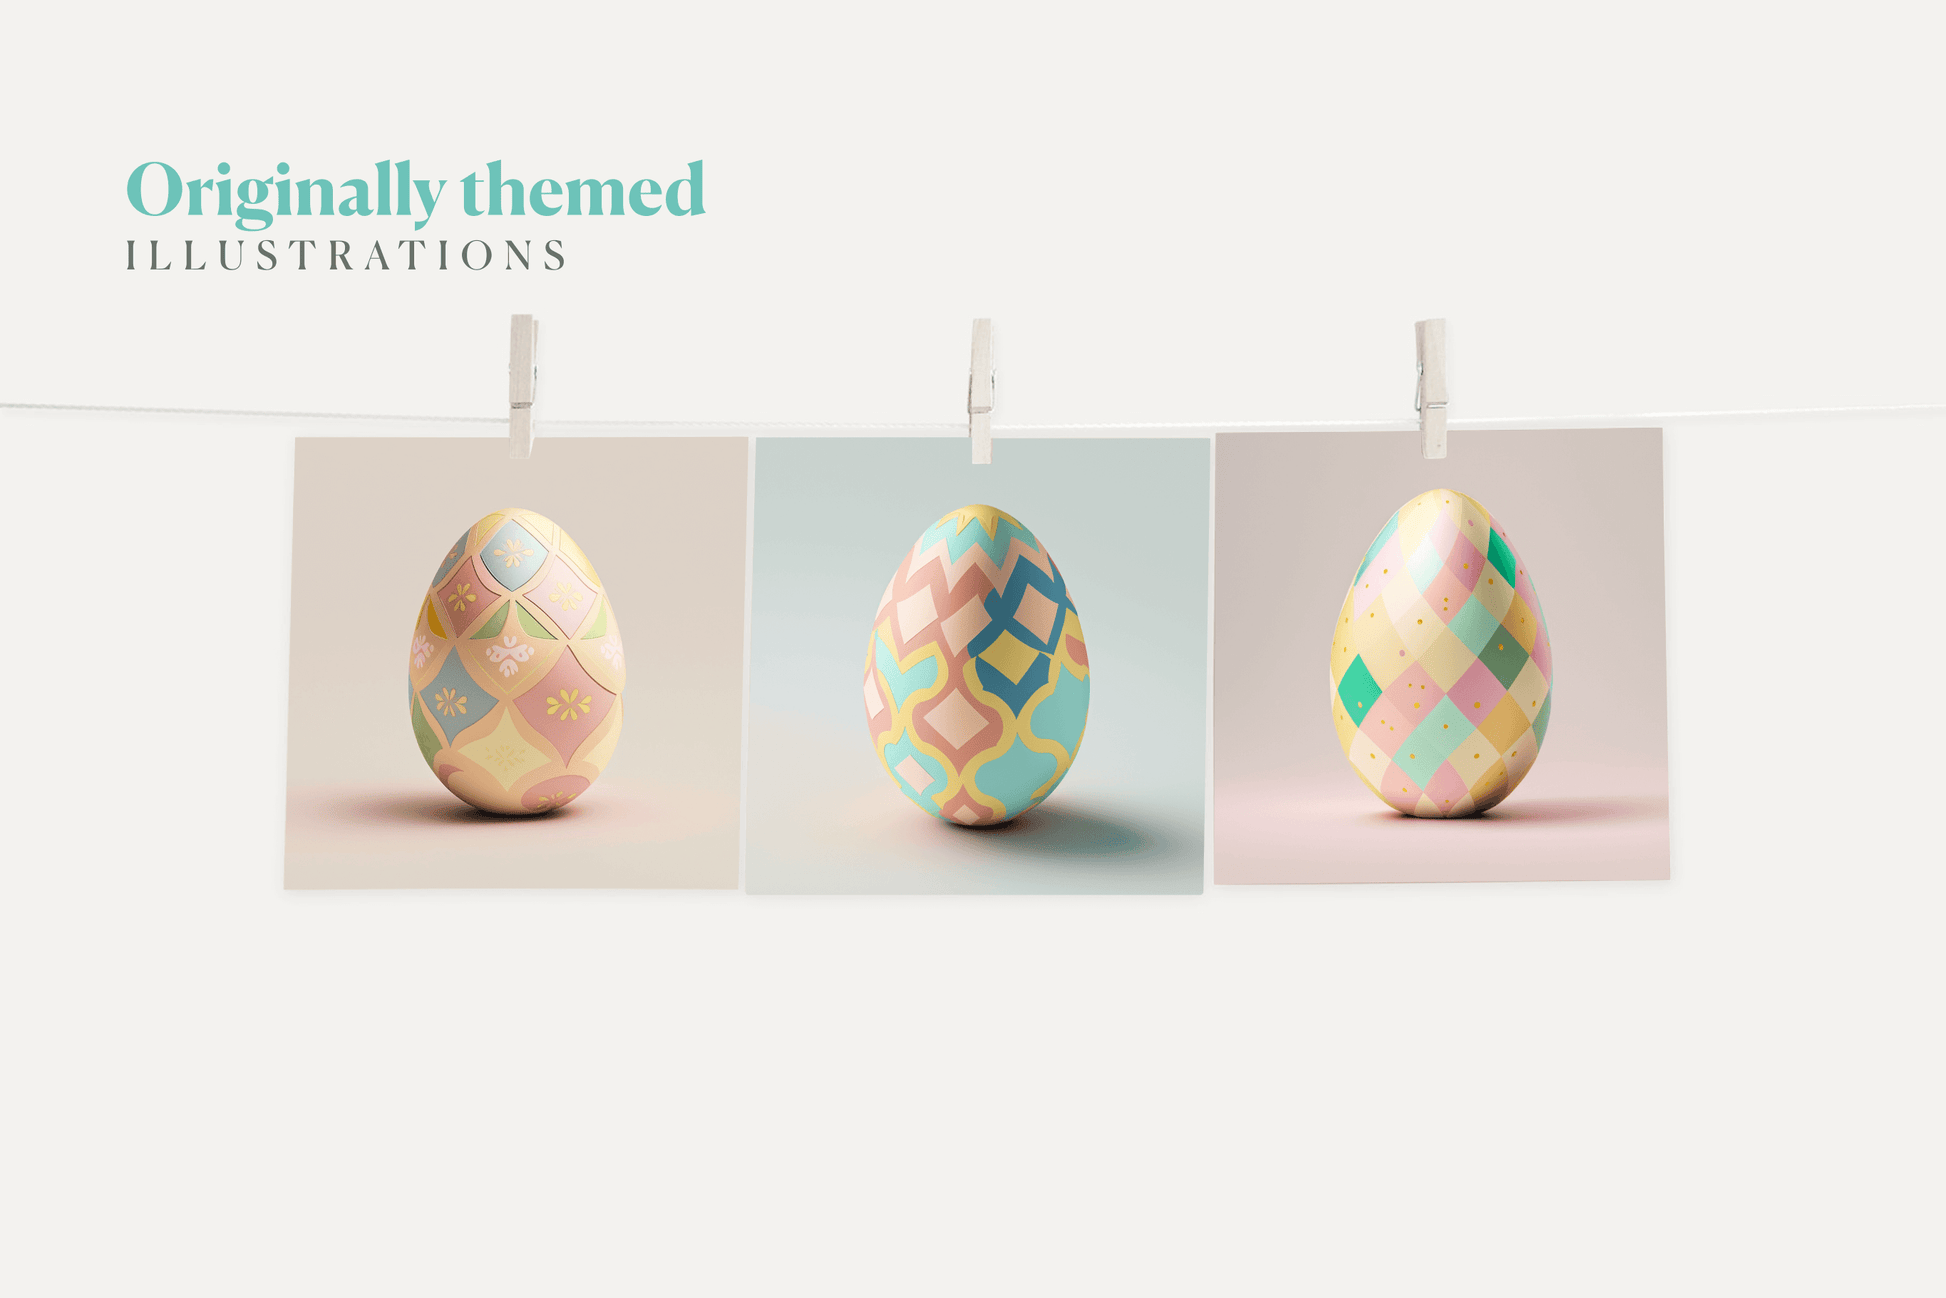 Hanging polaroid photographs of beautifully decorated easter eggs with minimalist patterns